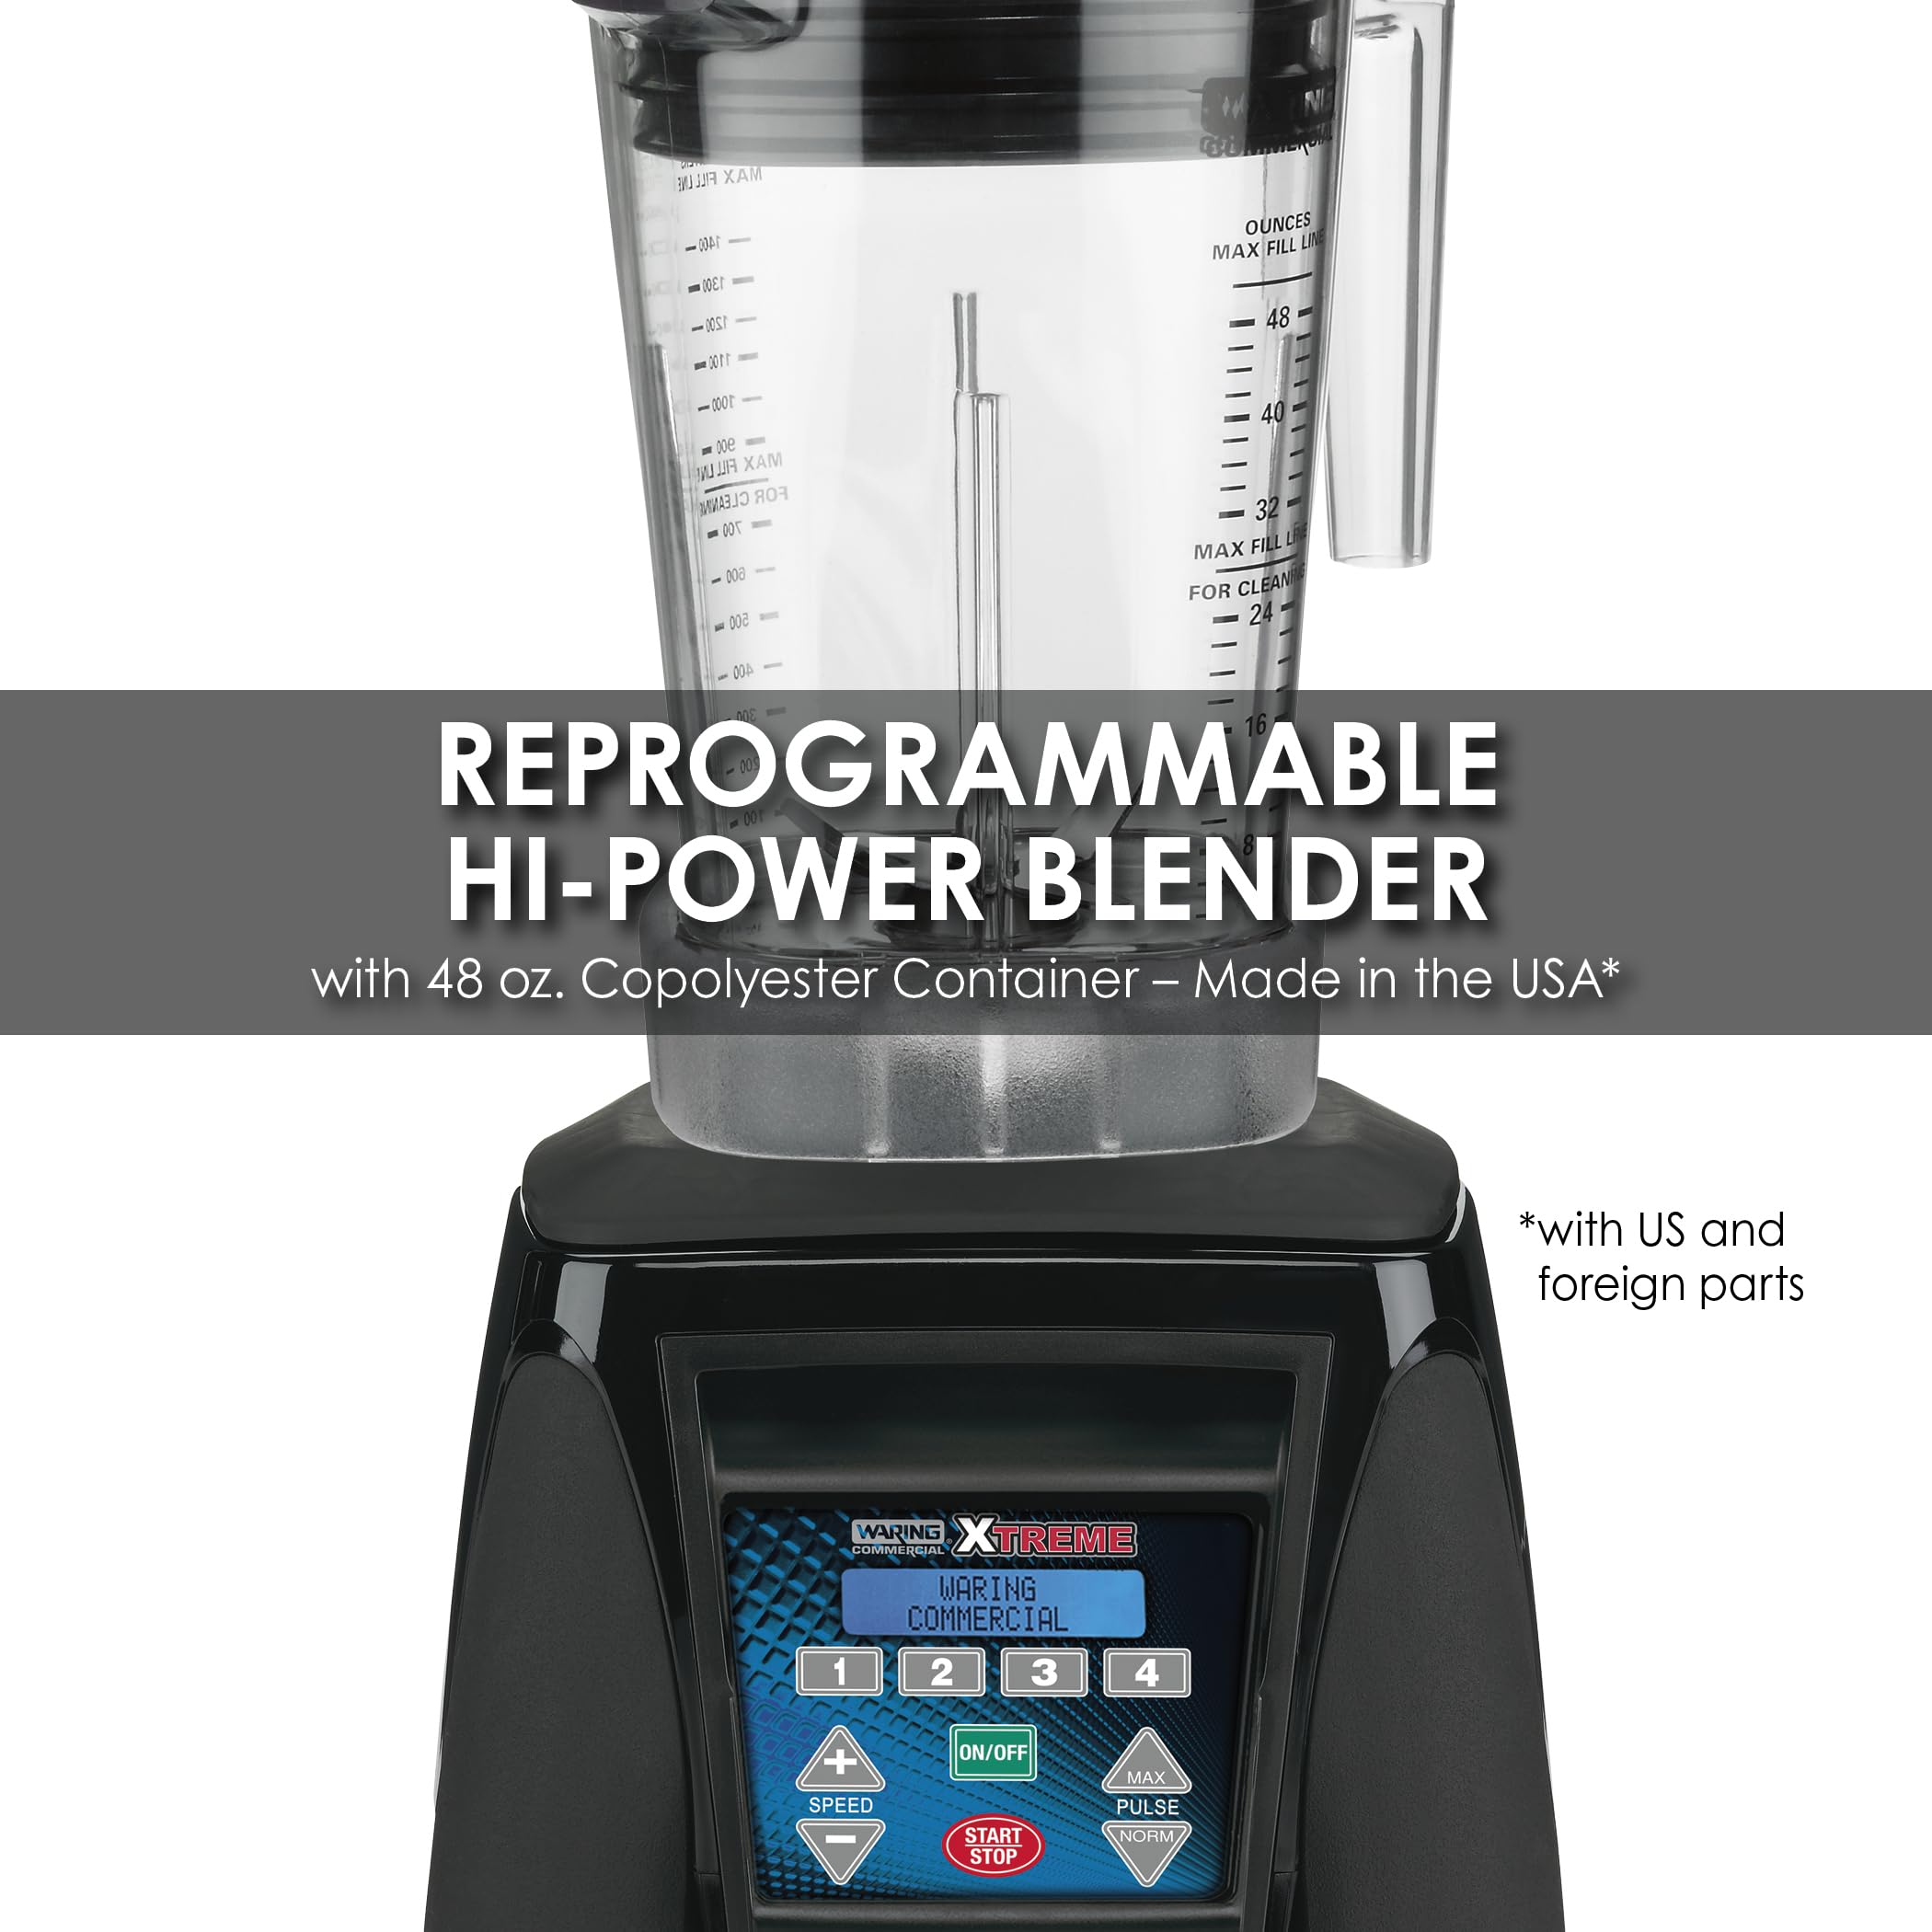 Waring Commercial MX1300XTXP 3.5 HP Blender with 4 recipe programable LCD Display and a 48 oz. BPA Free Copolyester Container, 120V, 5-15 Phase Plug